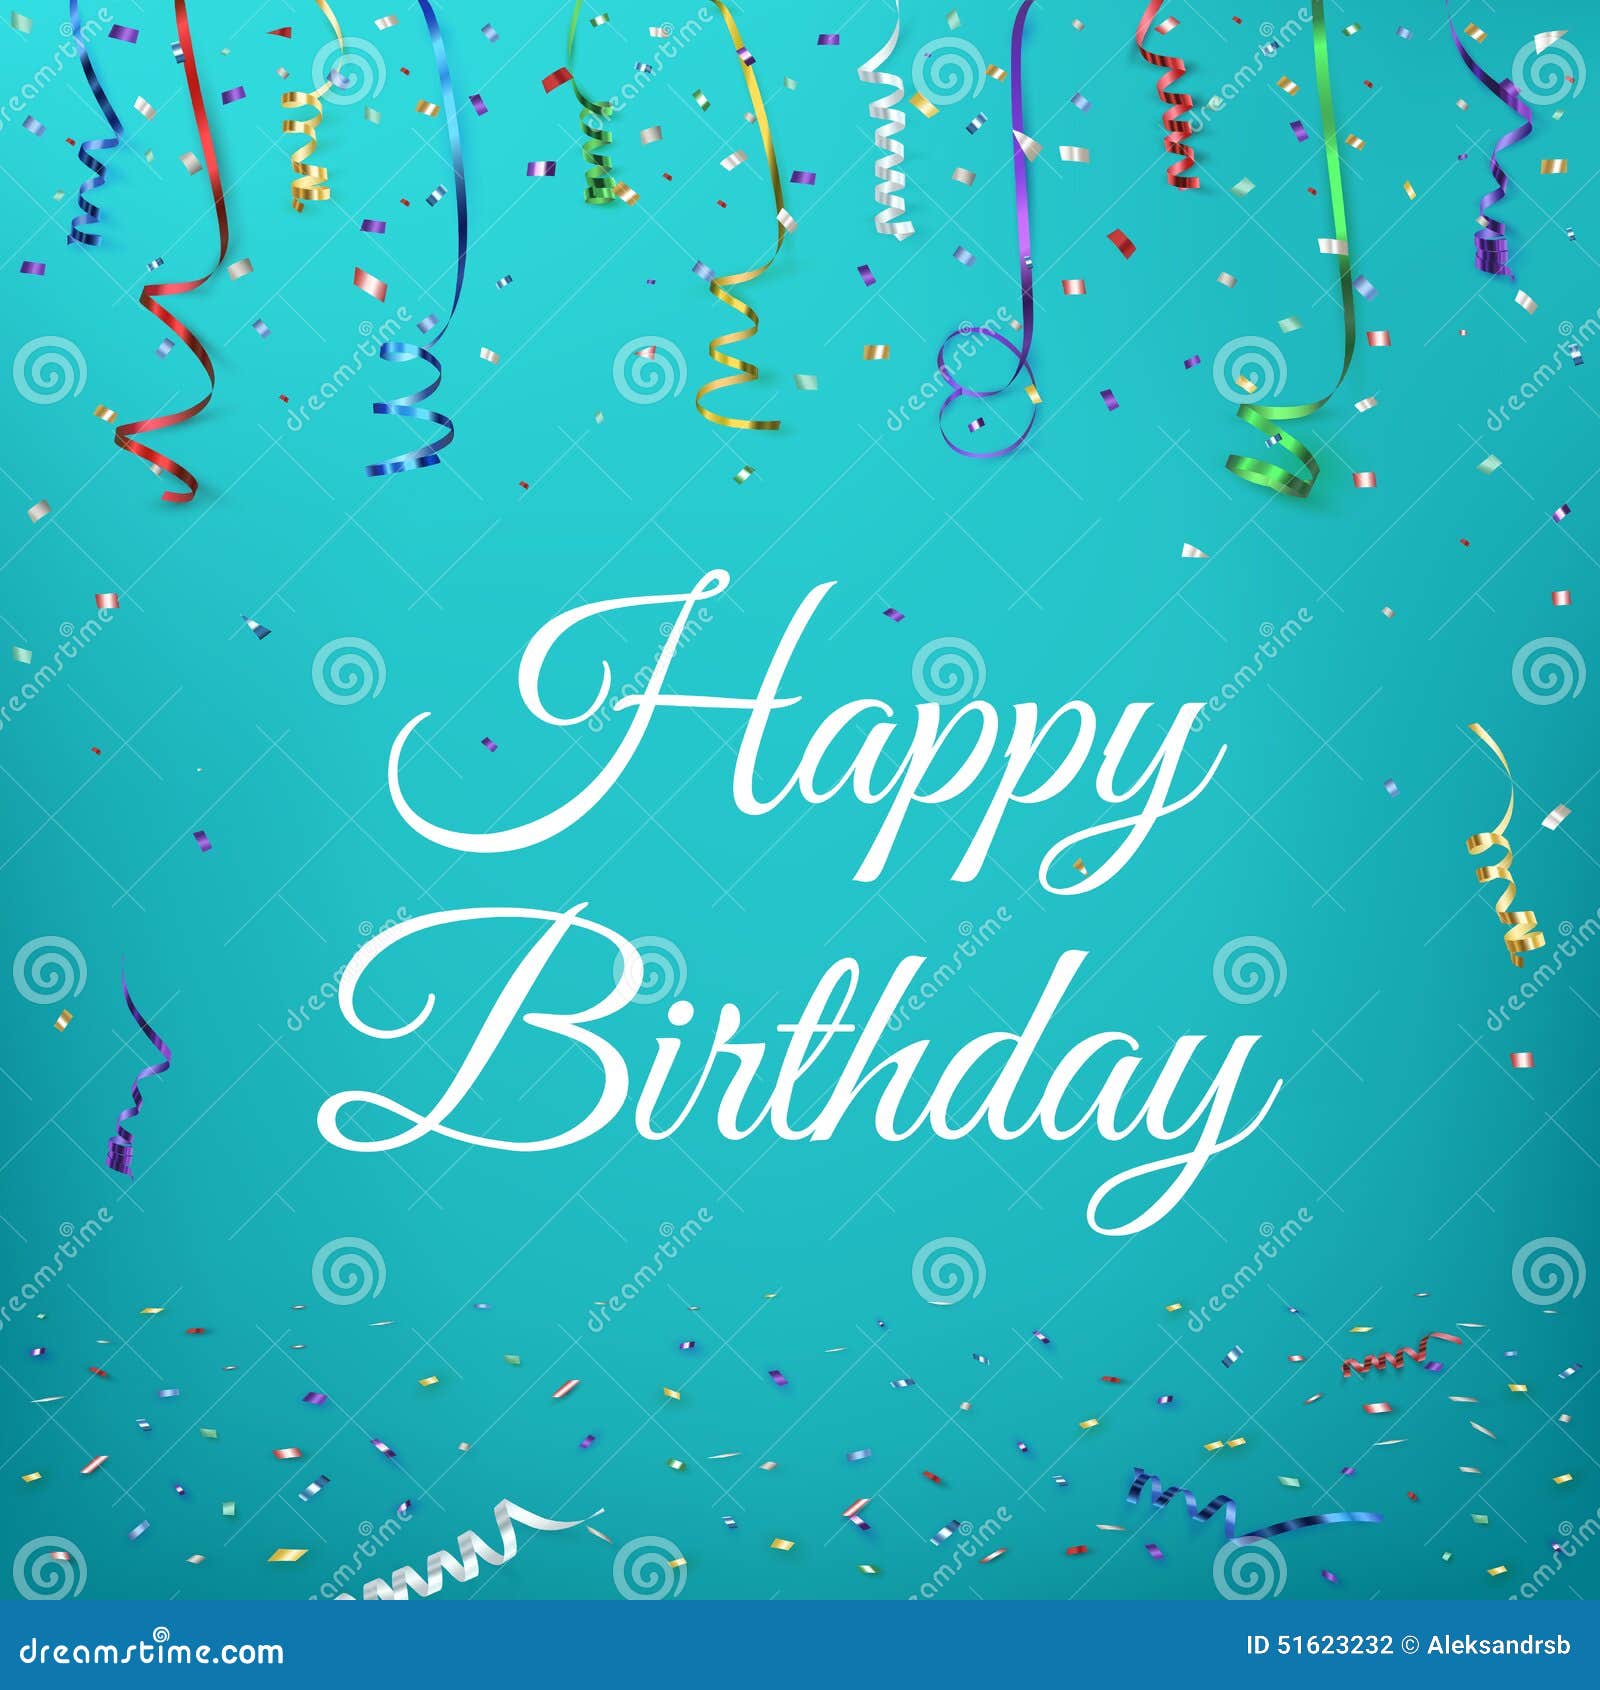 Happy Birthday Images Stock Illustrations – 821,410 Happy Birthday Images  Stock Illustrations, Vectors & Clipart - Dreamstime